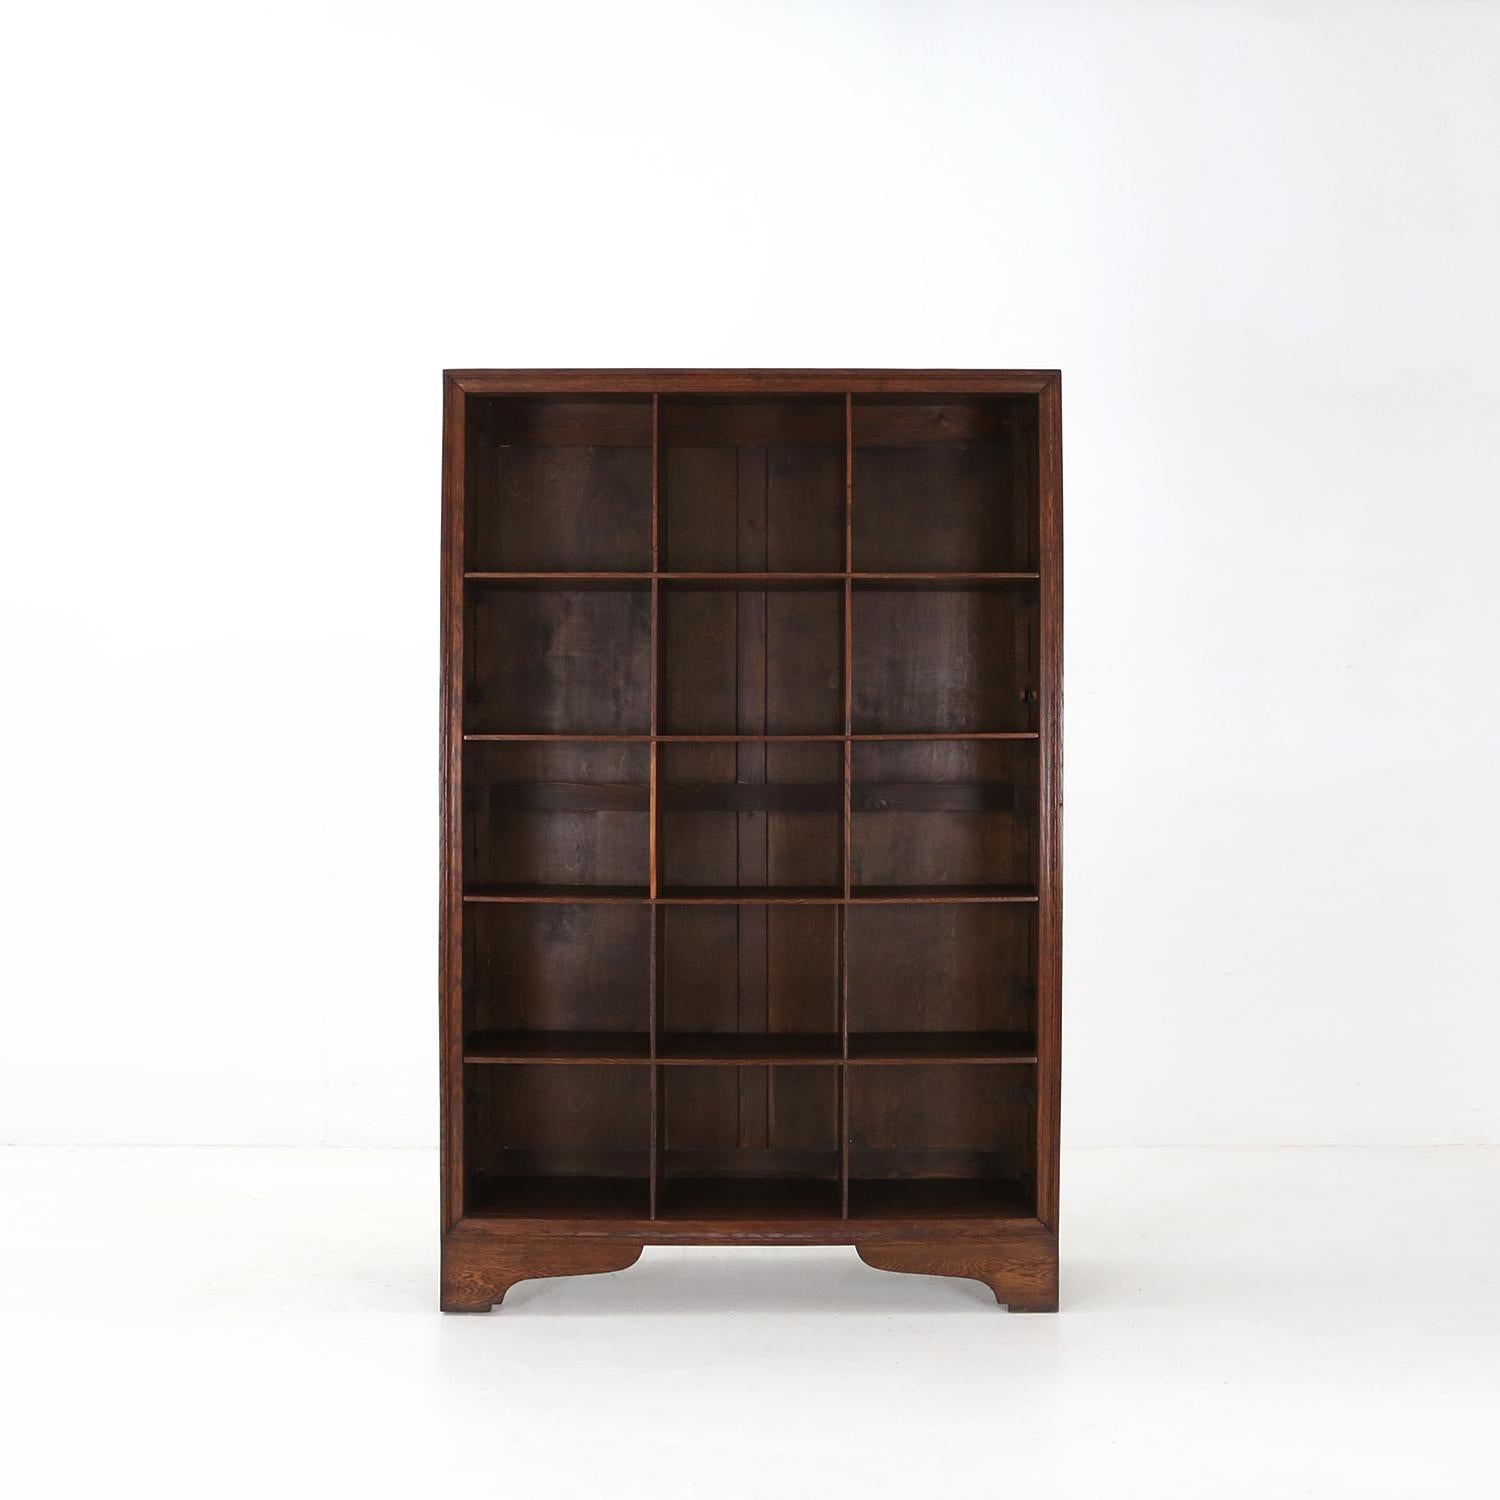 Art Deco shelve or bookcase made around 1930.
Great for storage books or decorative objects.